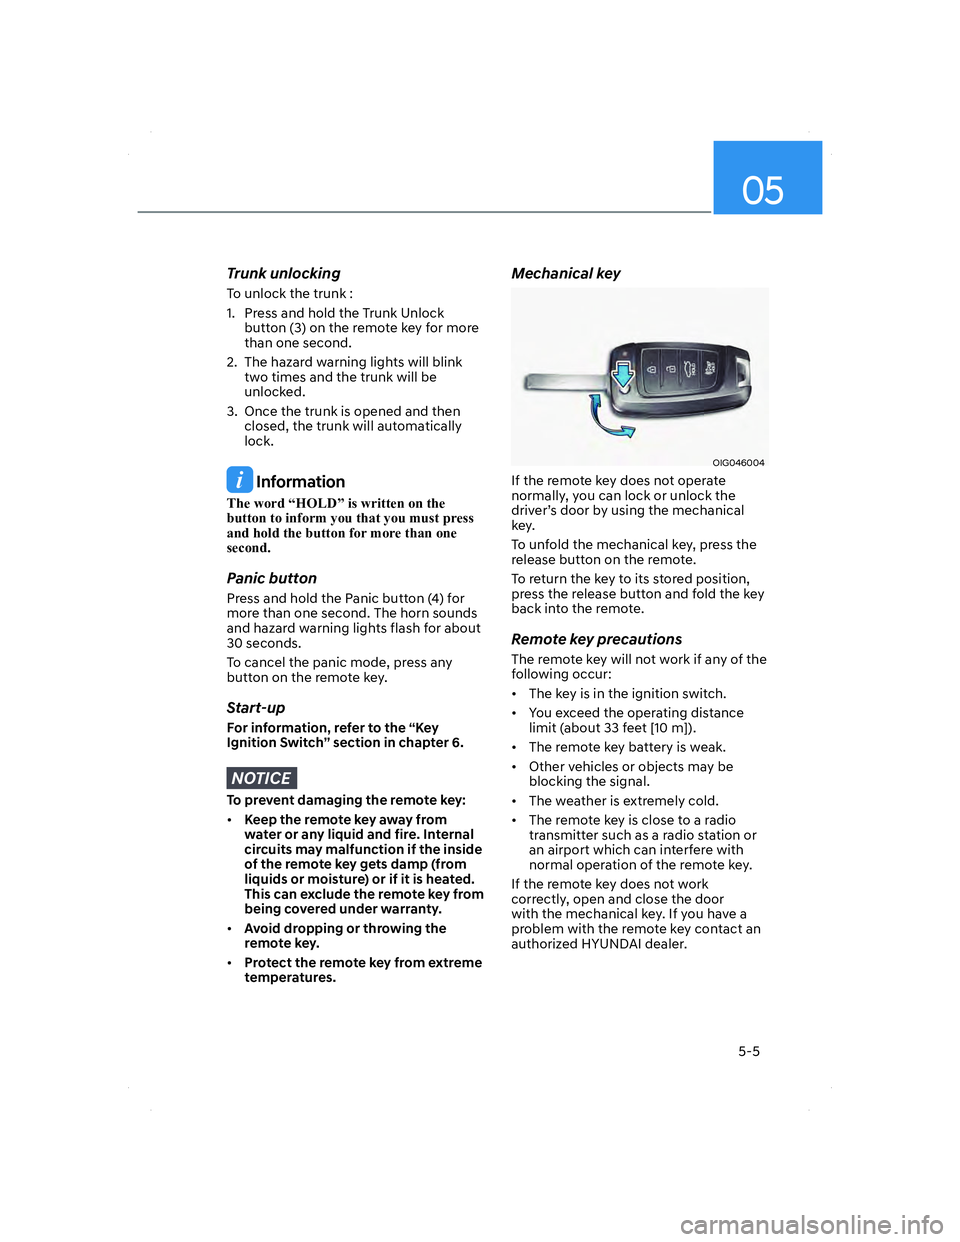 HYUNDAI ELANTRA 2022  Owners Manual 05
5-5
Trunk unlocking
To unlock the trunk :
1.  Press and hold the Trunk Unlock 
button (3) on the remote key for more 
than one second.
2.  The hazard warning lights will blink 
two times and the tr